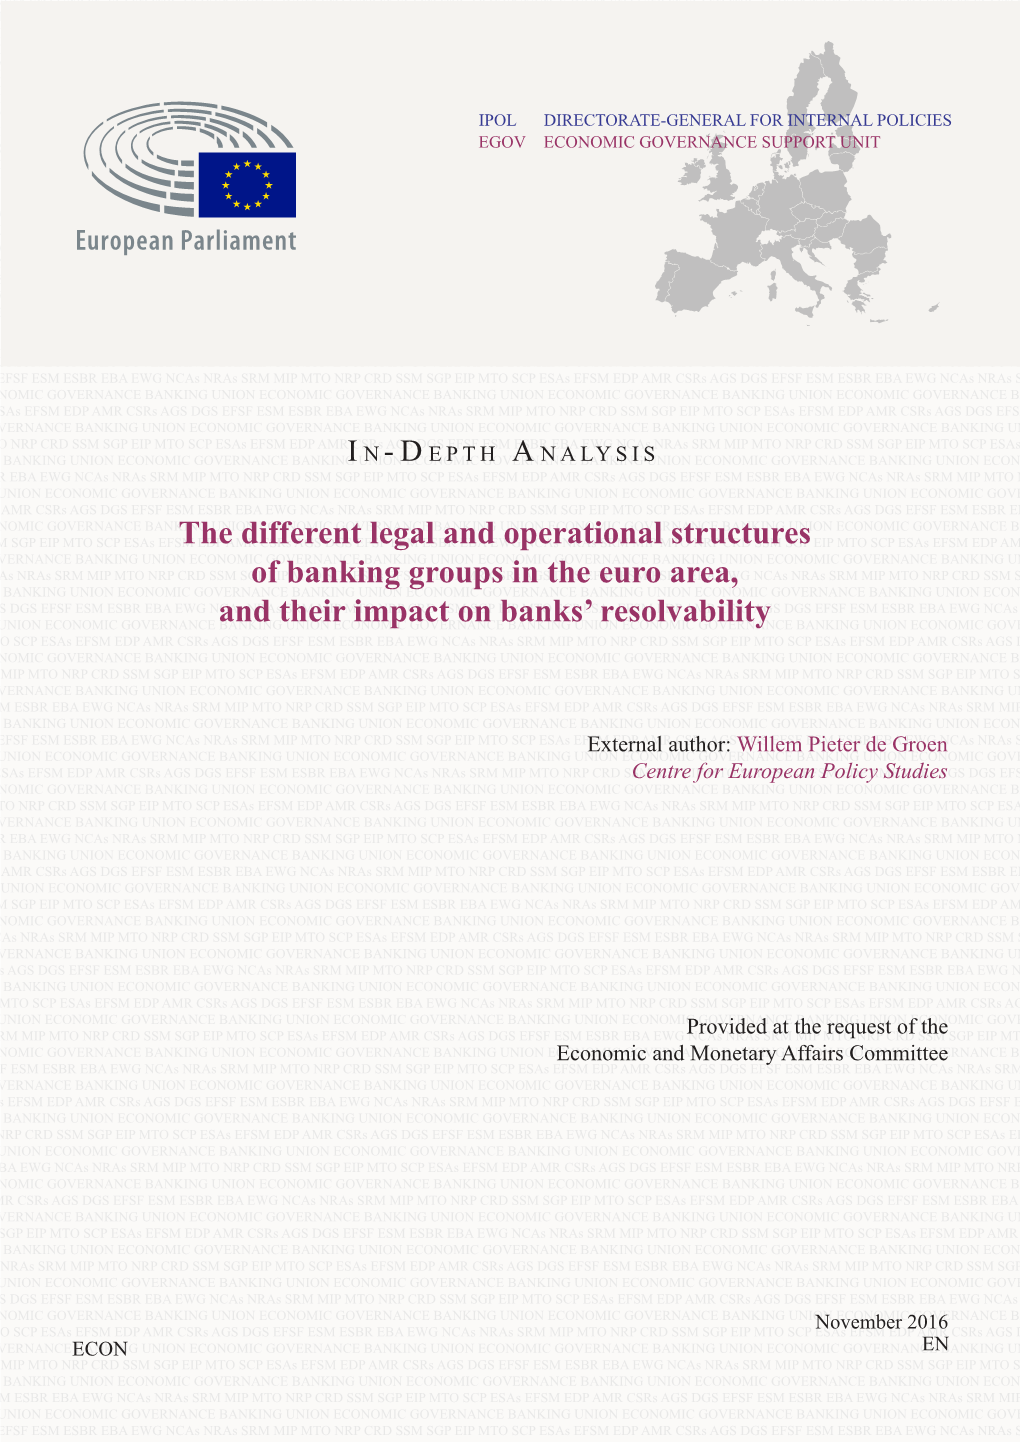 The Different Legal and Operational Structures of Banking Groups in the Euro Area, and Their Impact on Banks’ Resolvability